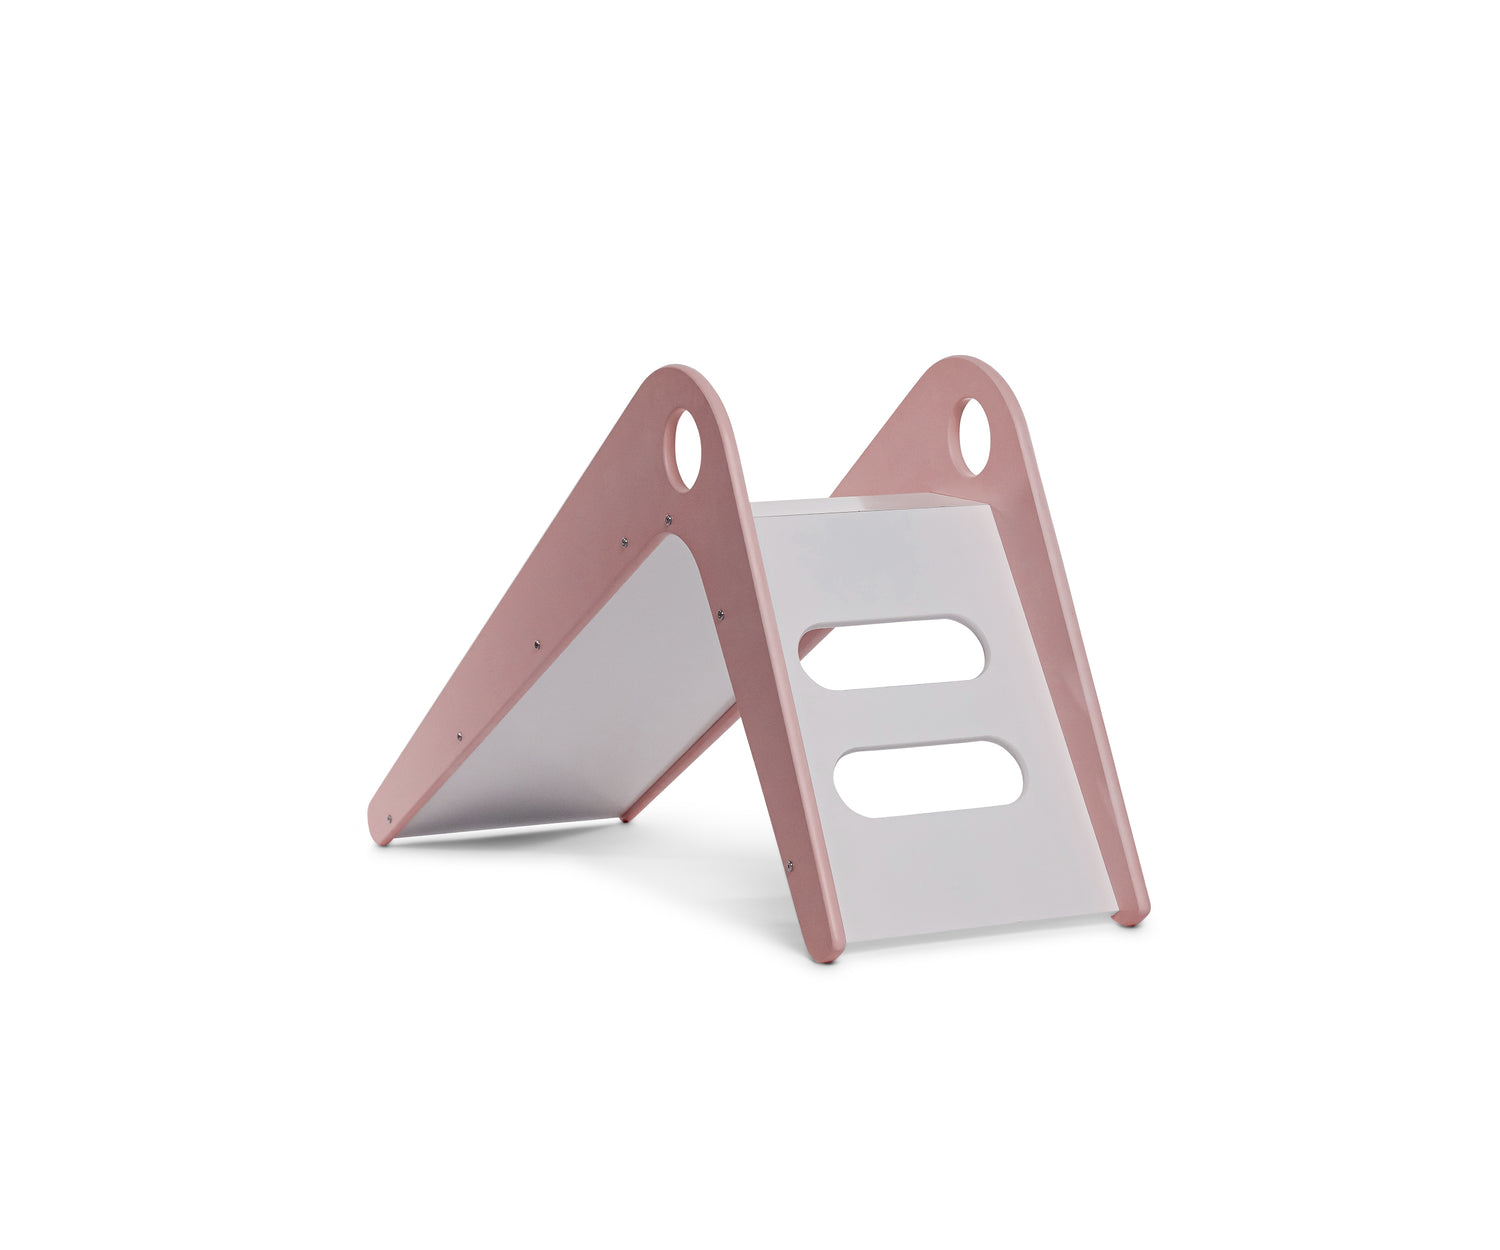 Manuka - Avenlur's Safe and Fun Indoor Toddler Slide in Pink - Rear View